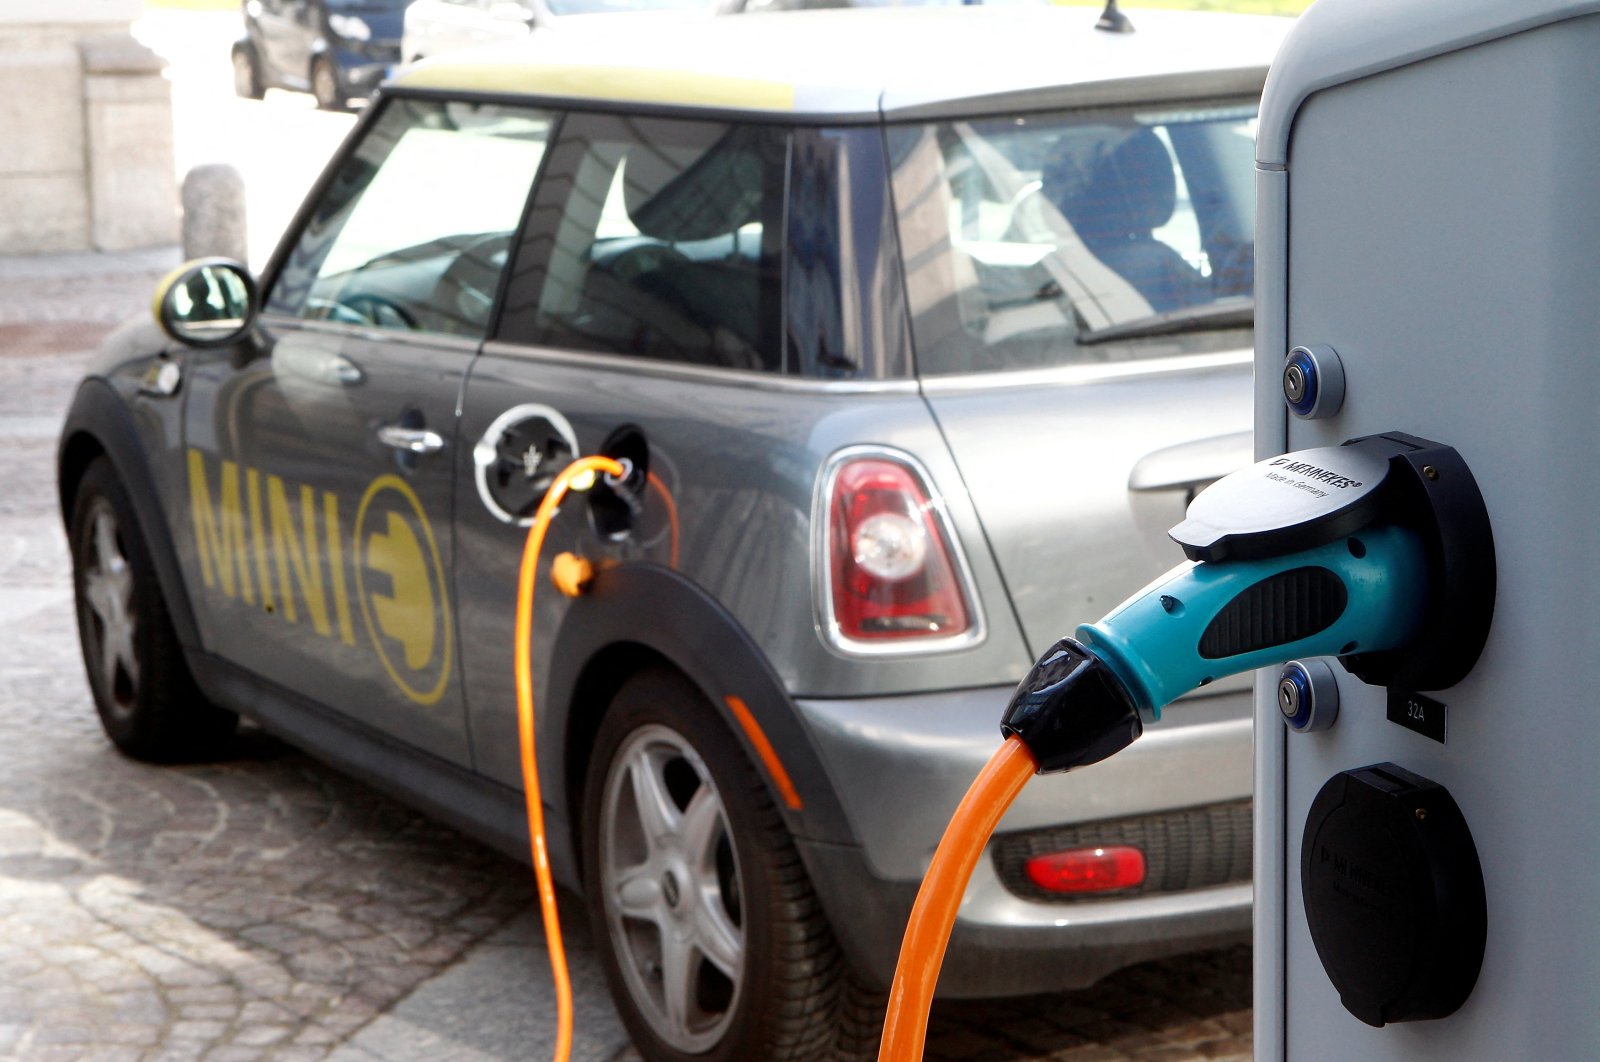 A BMW Mini electric car is charged at a station, downtown Munich, Germany, March 29, 2012. (Reuters Photo)